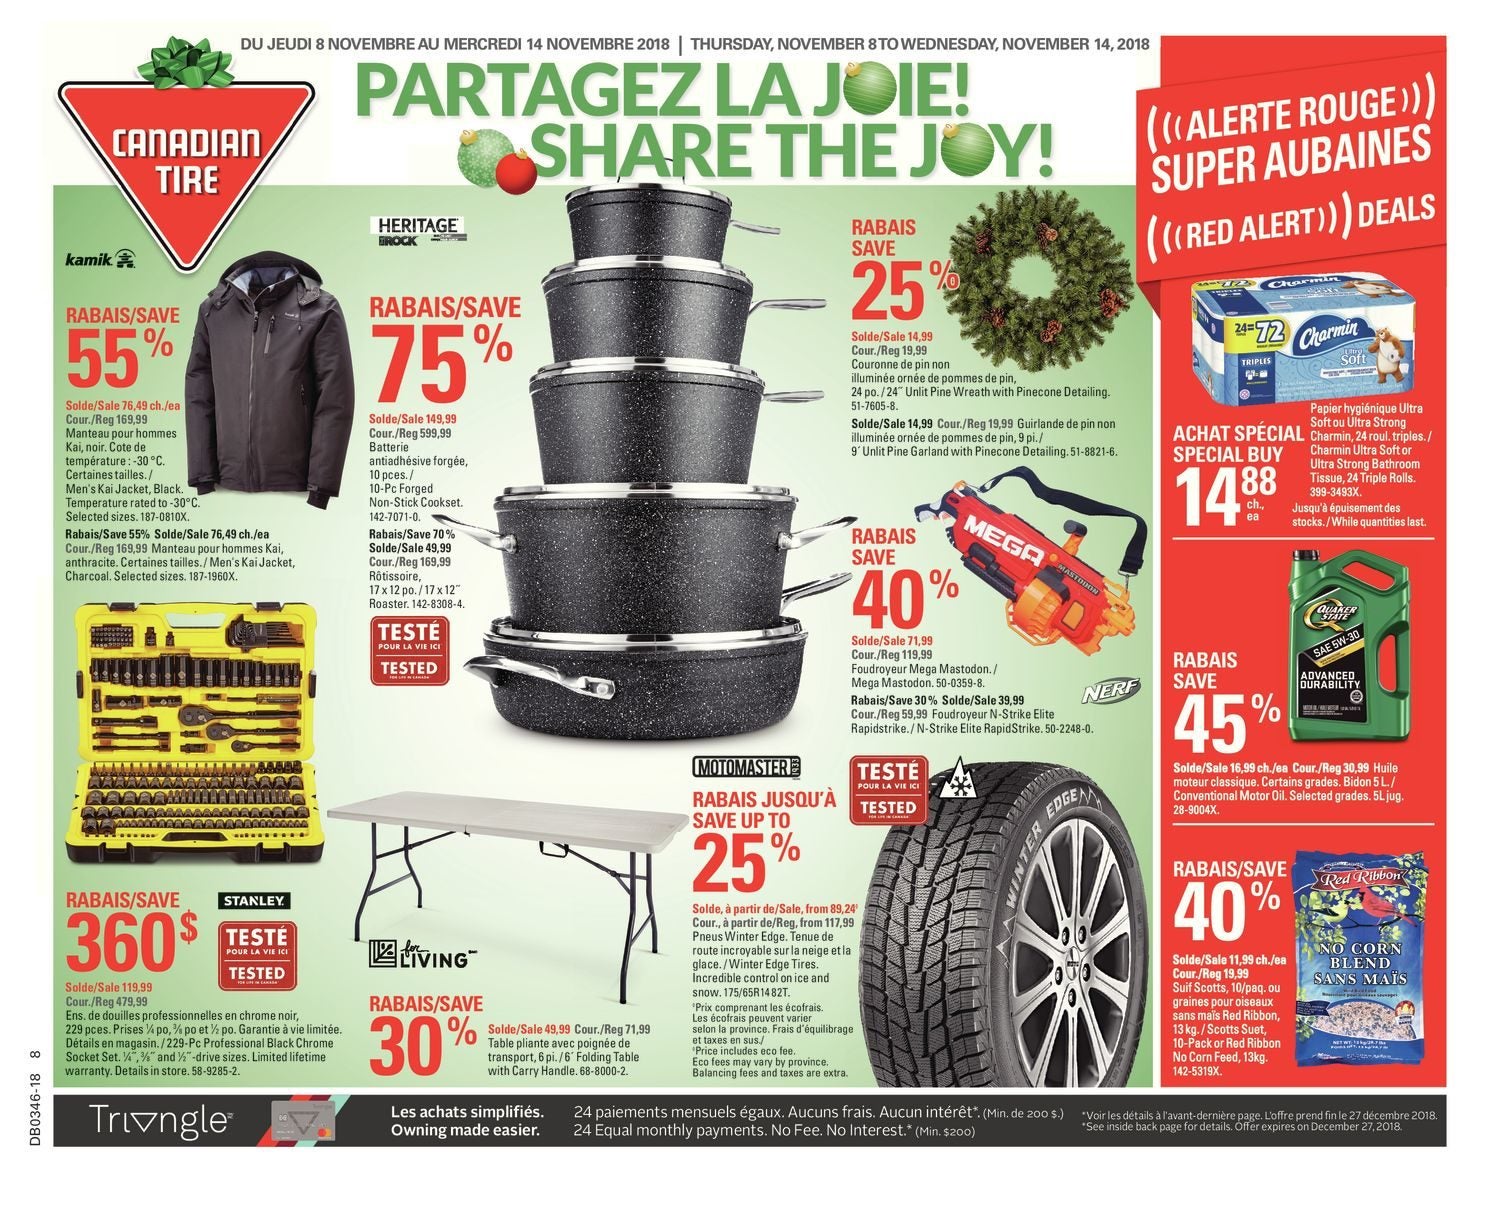 Canadian Tire Weekly Flyer Weekly Share The Joy Nov 8 14